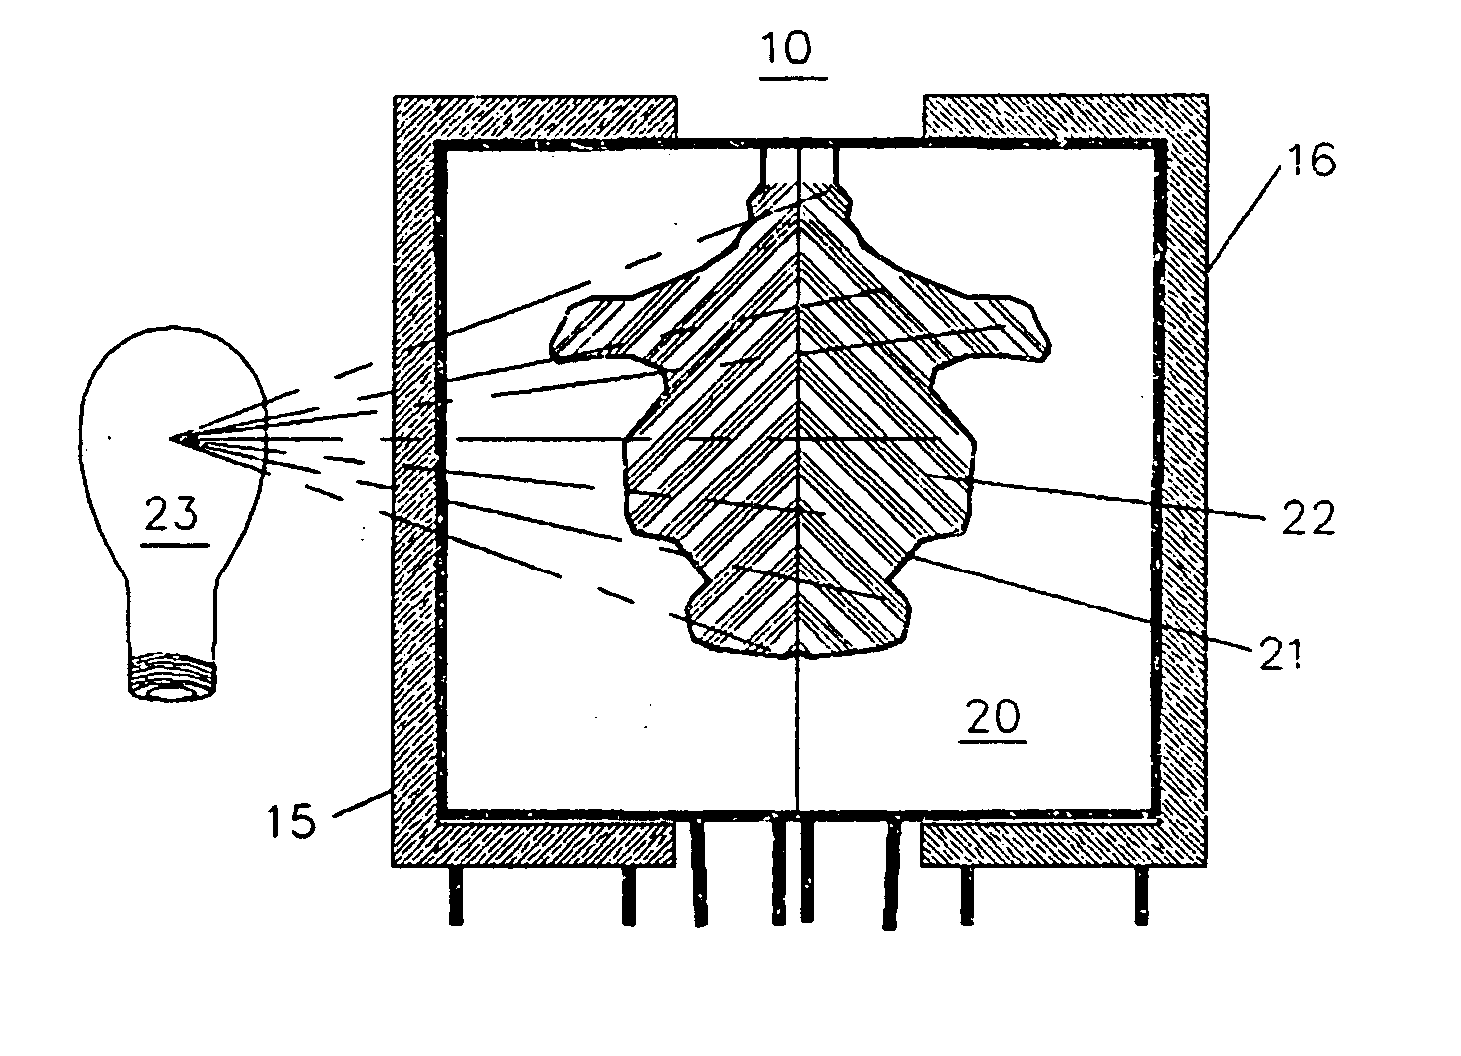 Method and apparatus for creating sacrificial patterns and cast parts